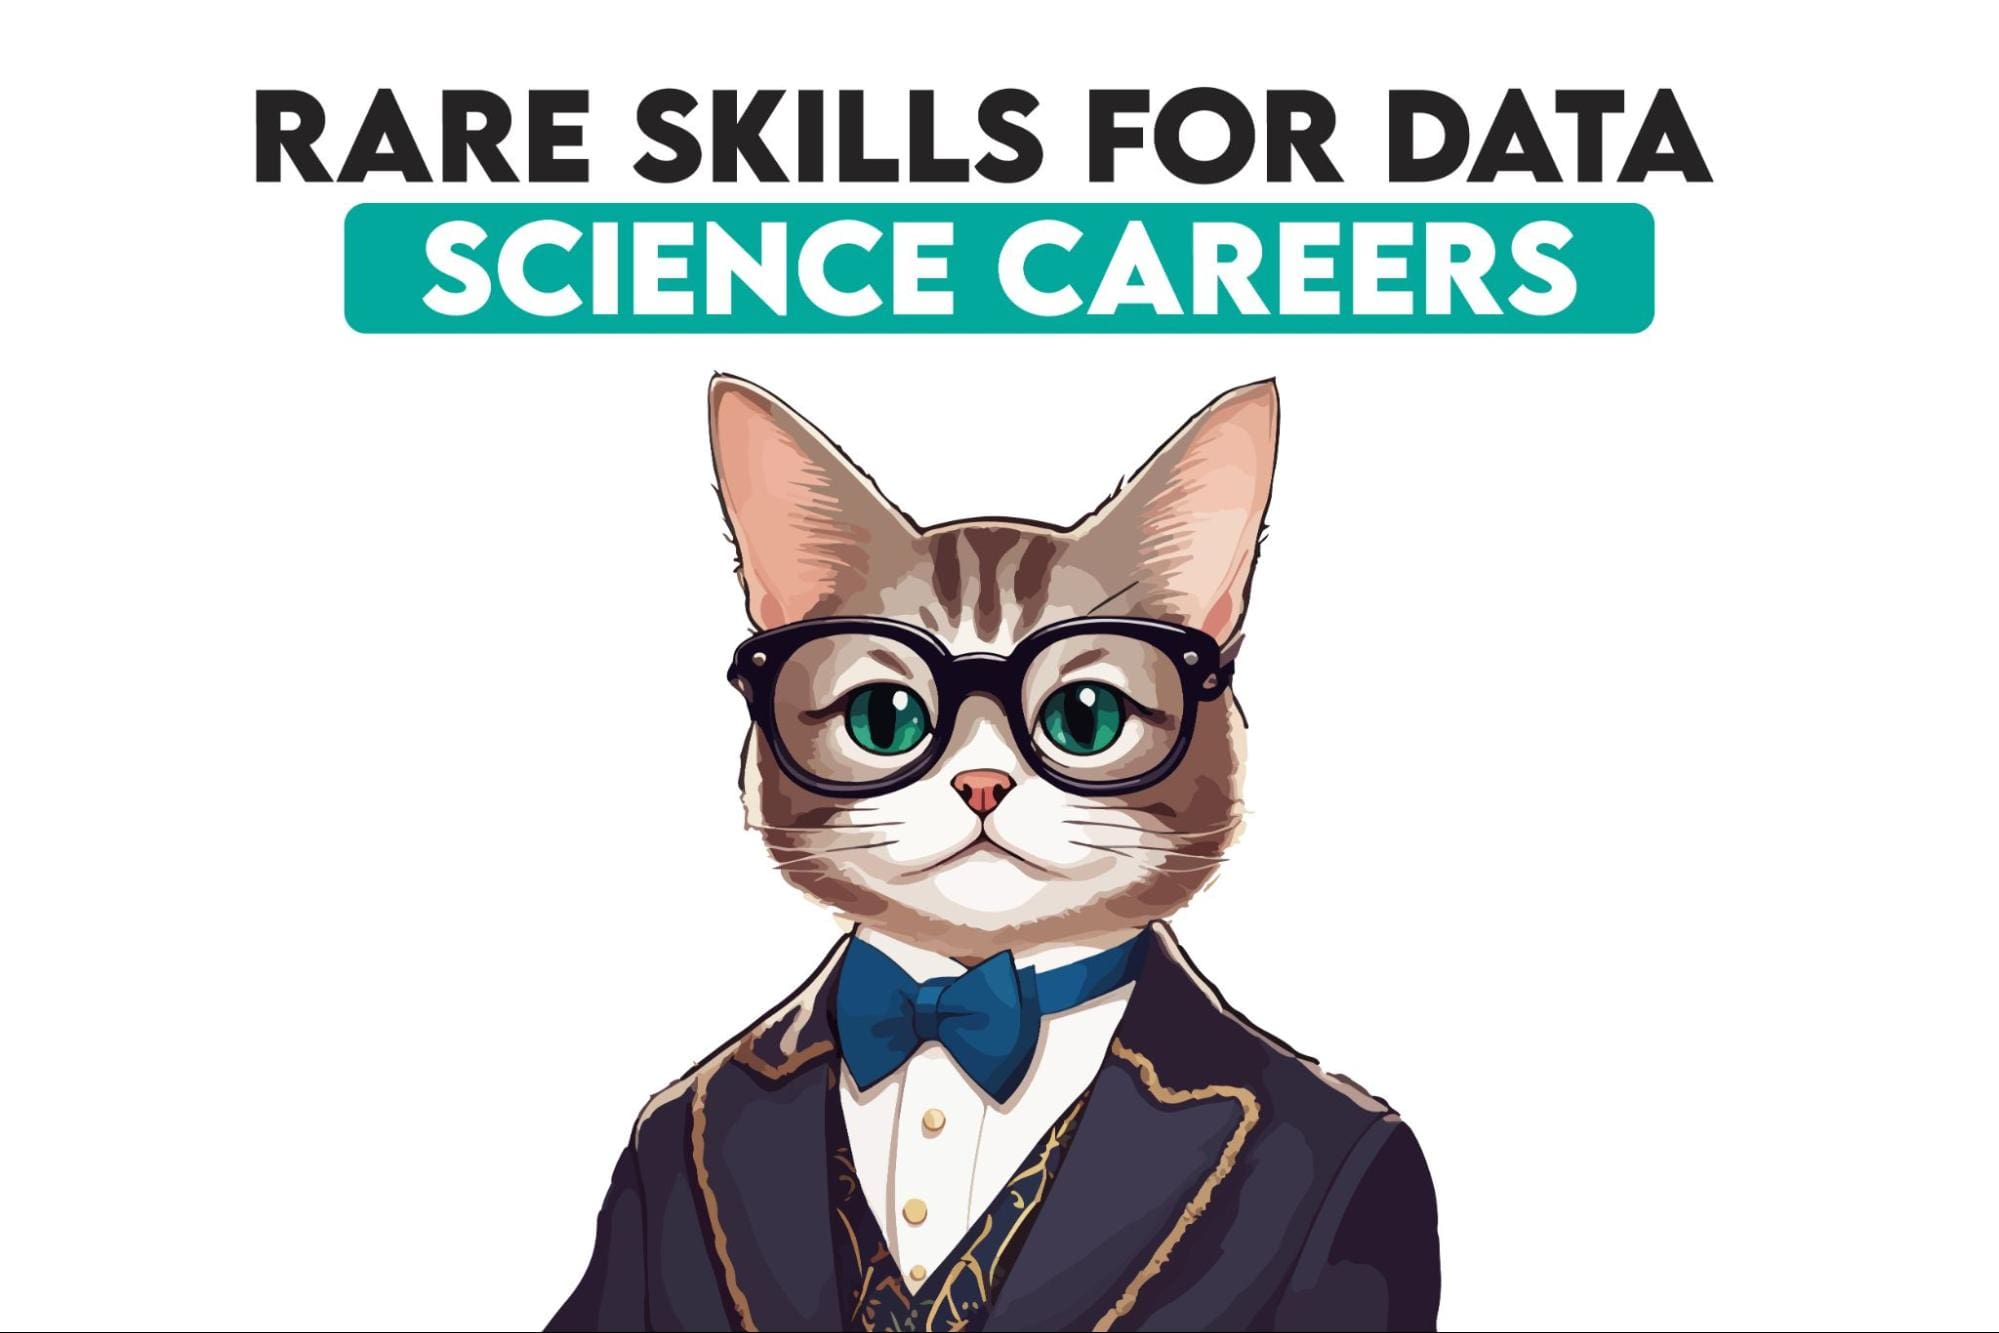 5 Uncommon Data Science Skills That Can Help You Land a Job